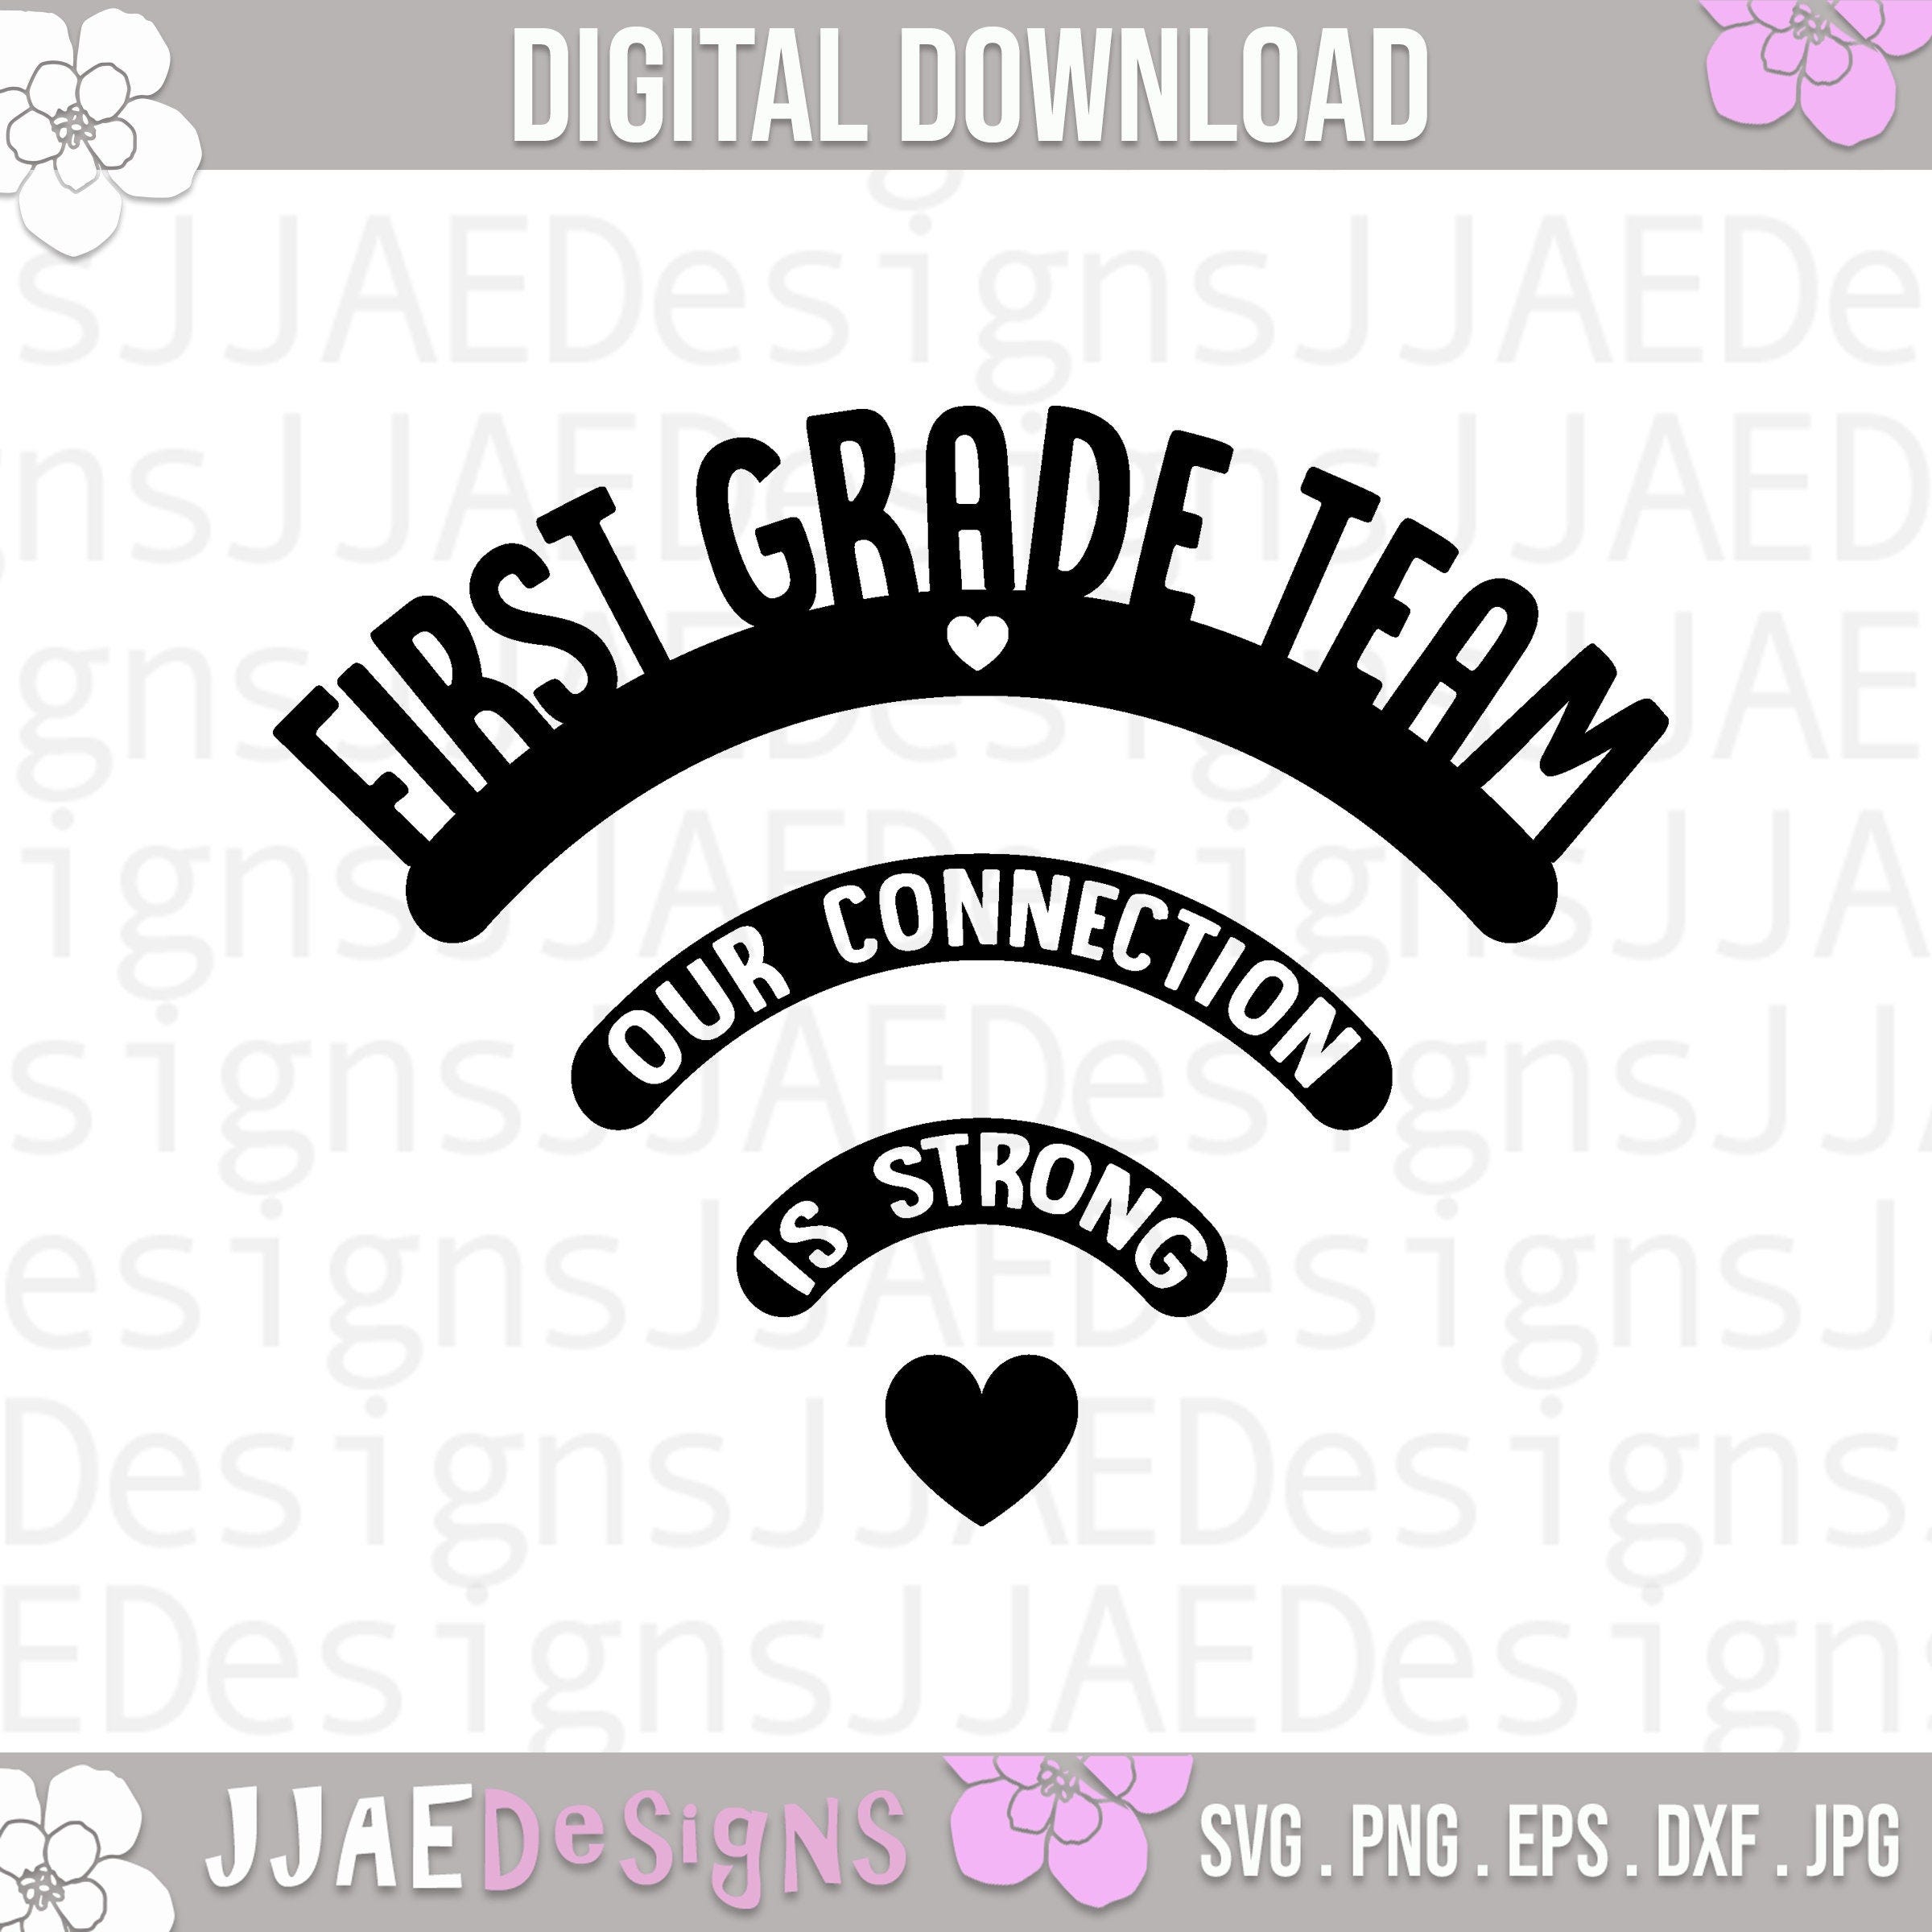 First Grade Team Our Connection is Strong Svg, first grade svg, 1st Grade Teacher Shirt Svg, Teacher Svg, Teacher Life Svg,  dxf png eps jpg